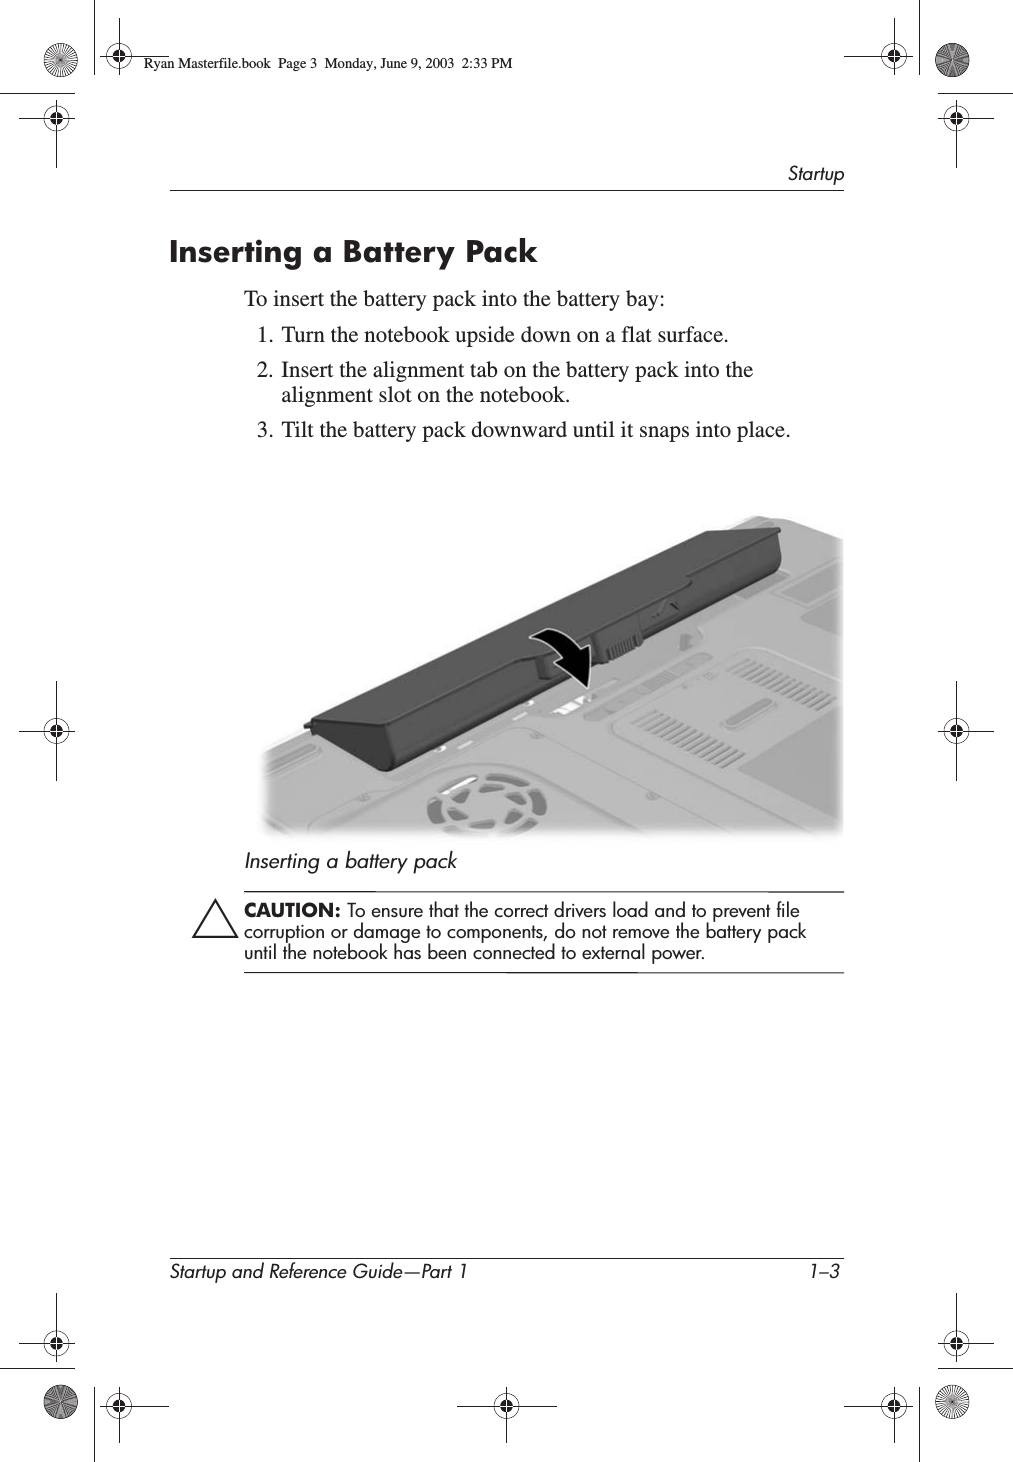 StartupStartup and Reference Guide—Part 1 1–3Inserting a Battery PackTo insert the battery pack into the battery bay:1. Turn the notebook upside down on a flat surface.2. Insert the alignment tab on the battery pack into the alignment slot on the notebook.3. Tilt the battery pack downward until it snaps into place.Inserting a battery packÄCAUTION: To ensure that the correct drivers load and to prevent file corruption or damage to components, do not remove the battery pack until the notebook has been connected to external power.Ryan Masterfile.book  Page 3  Monday, June 9, 2003  2:33 PM